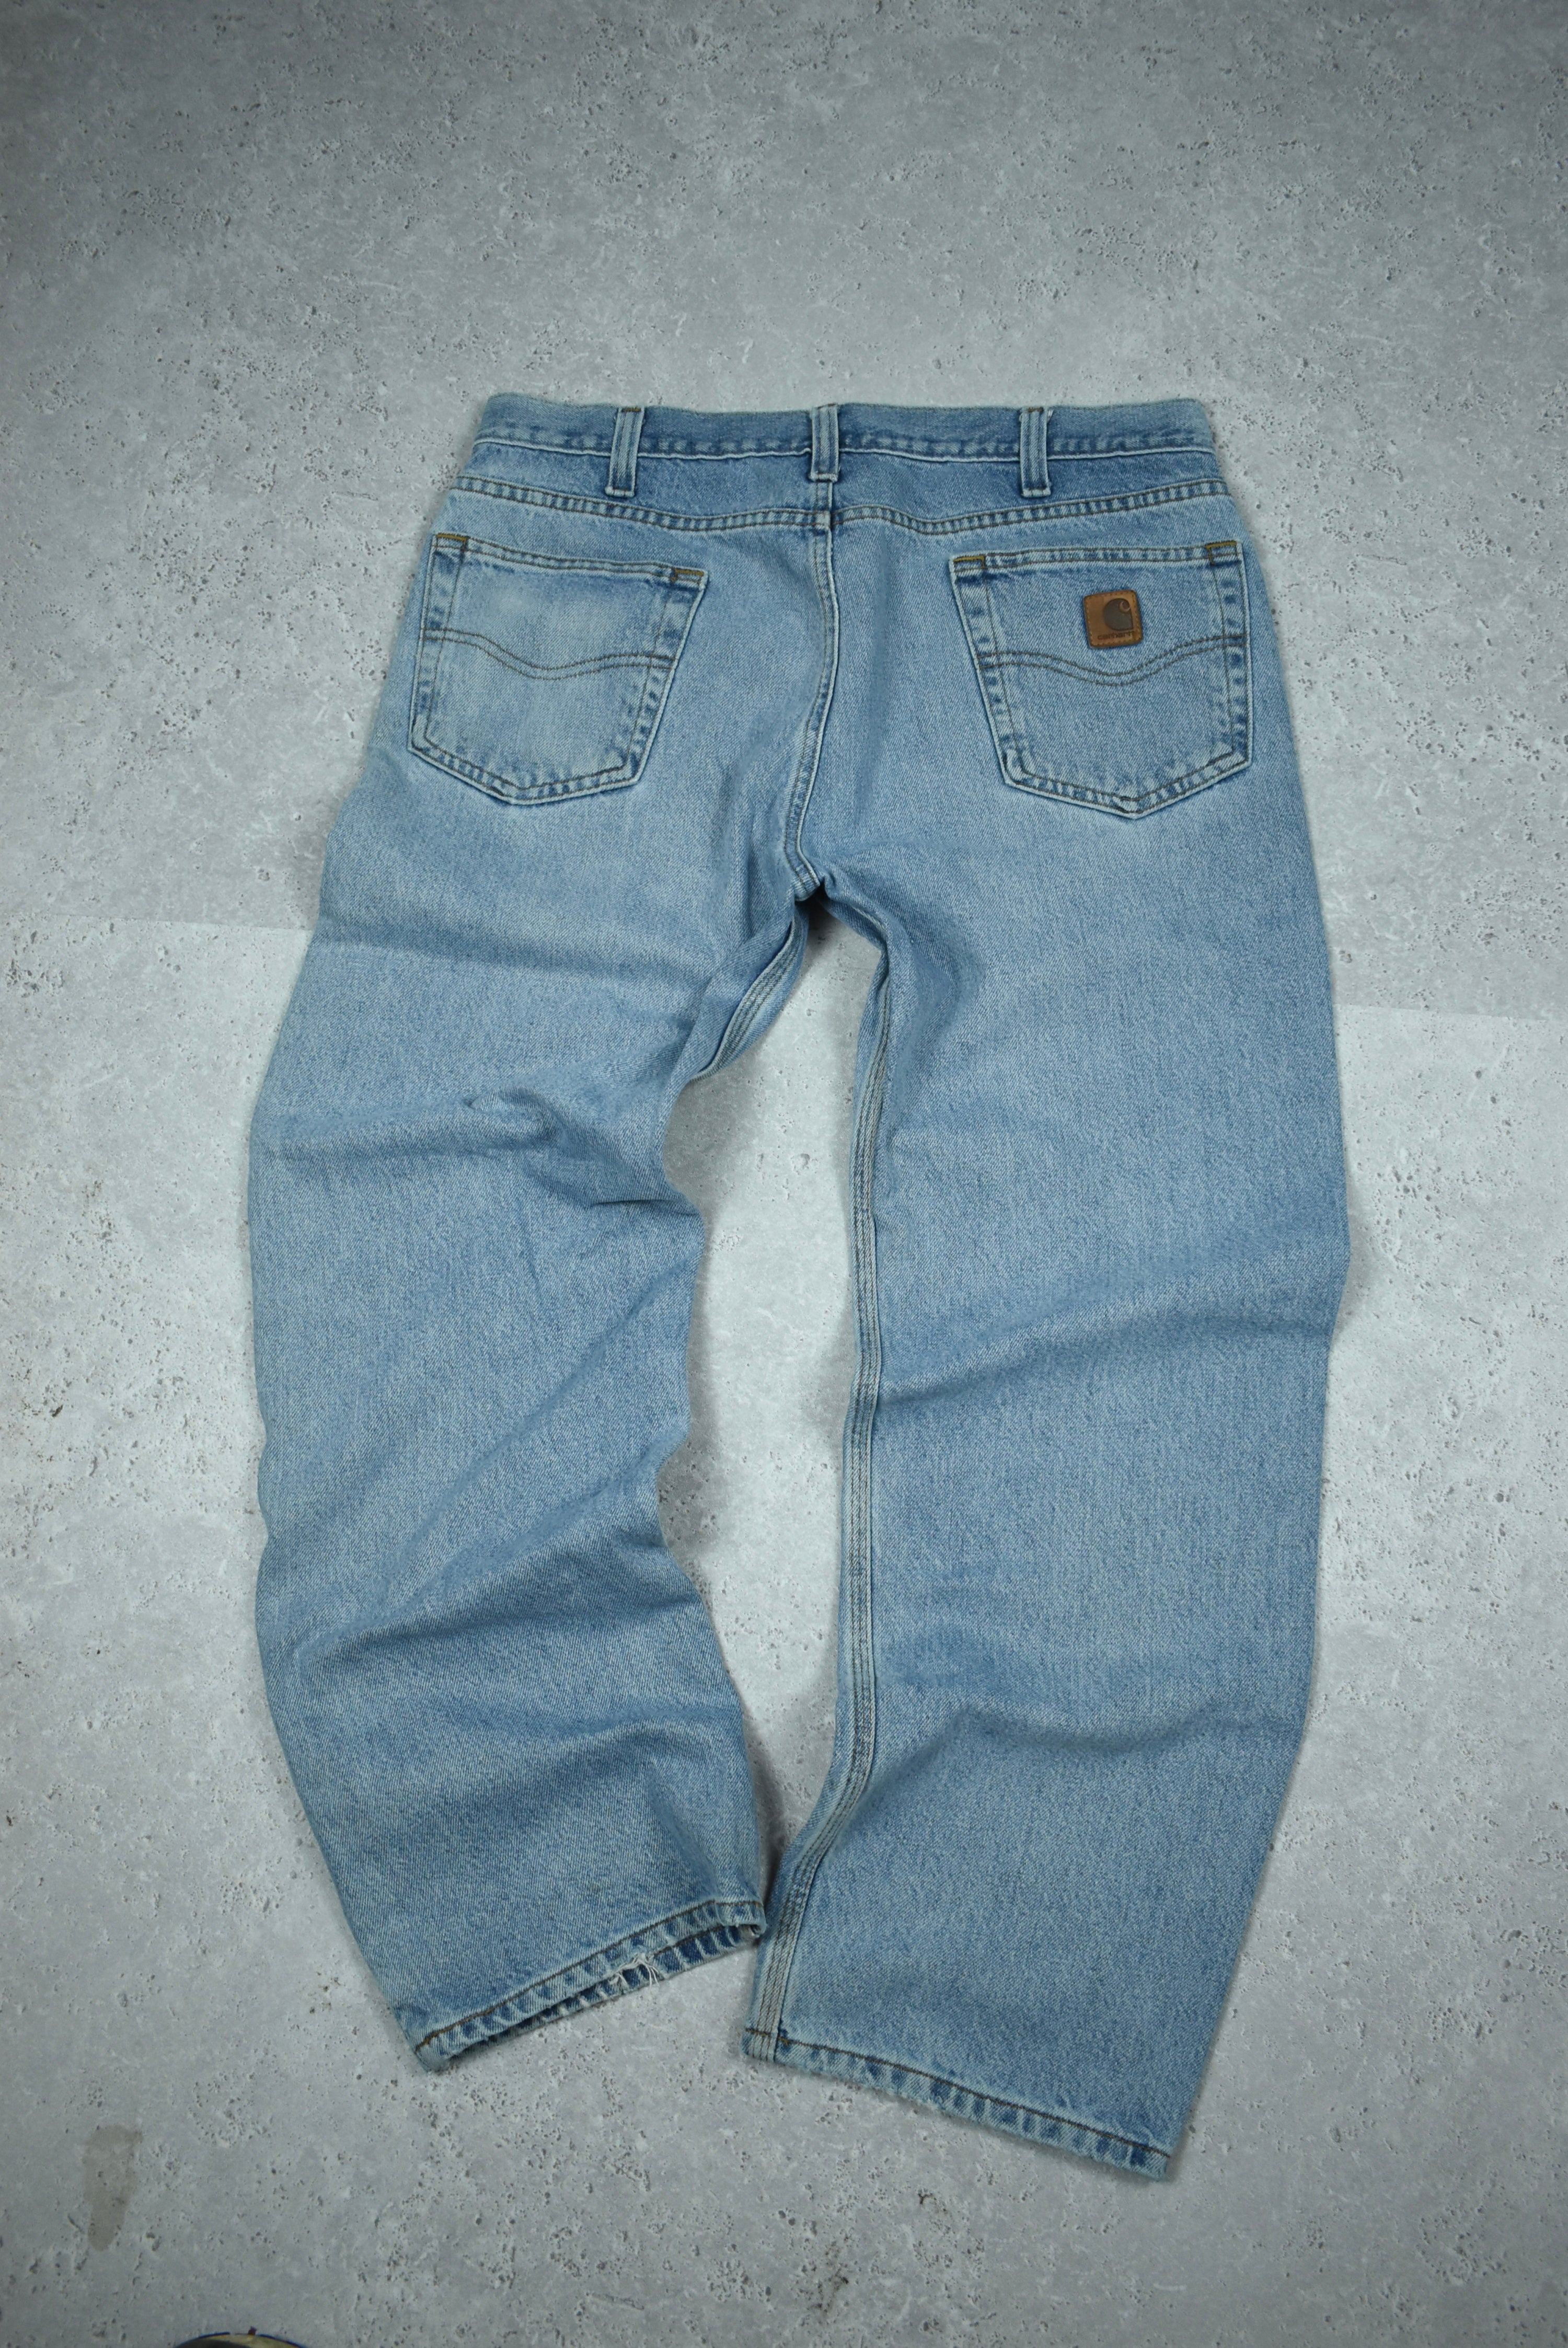 Vintage Carhartt Dungaree Fit Jeans 34x30